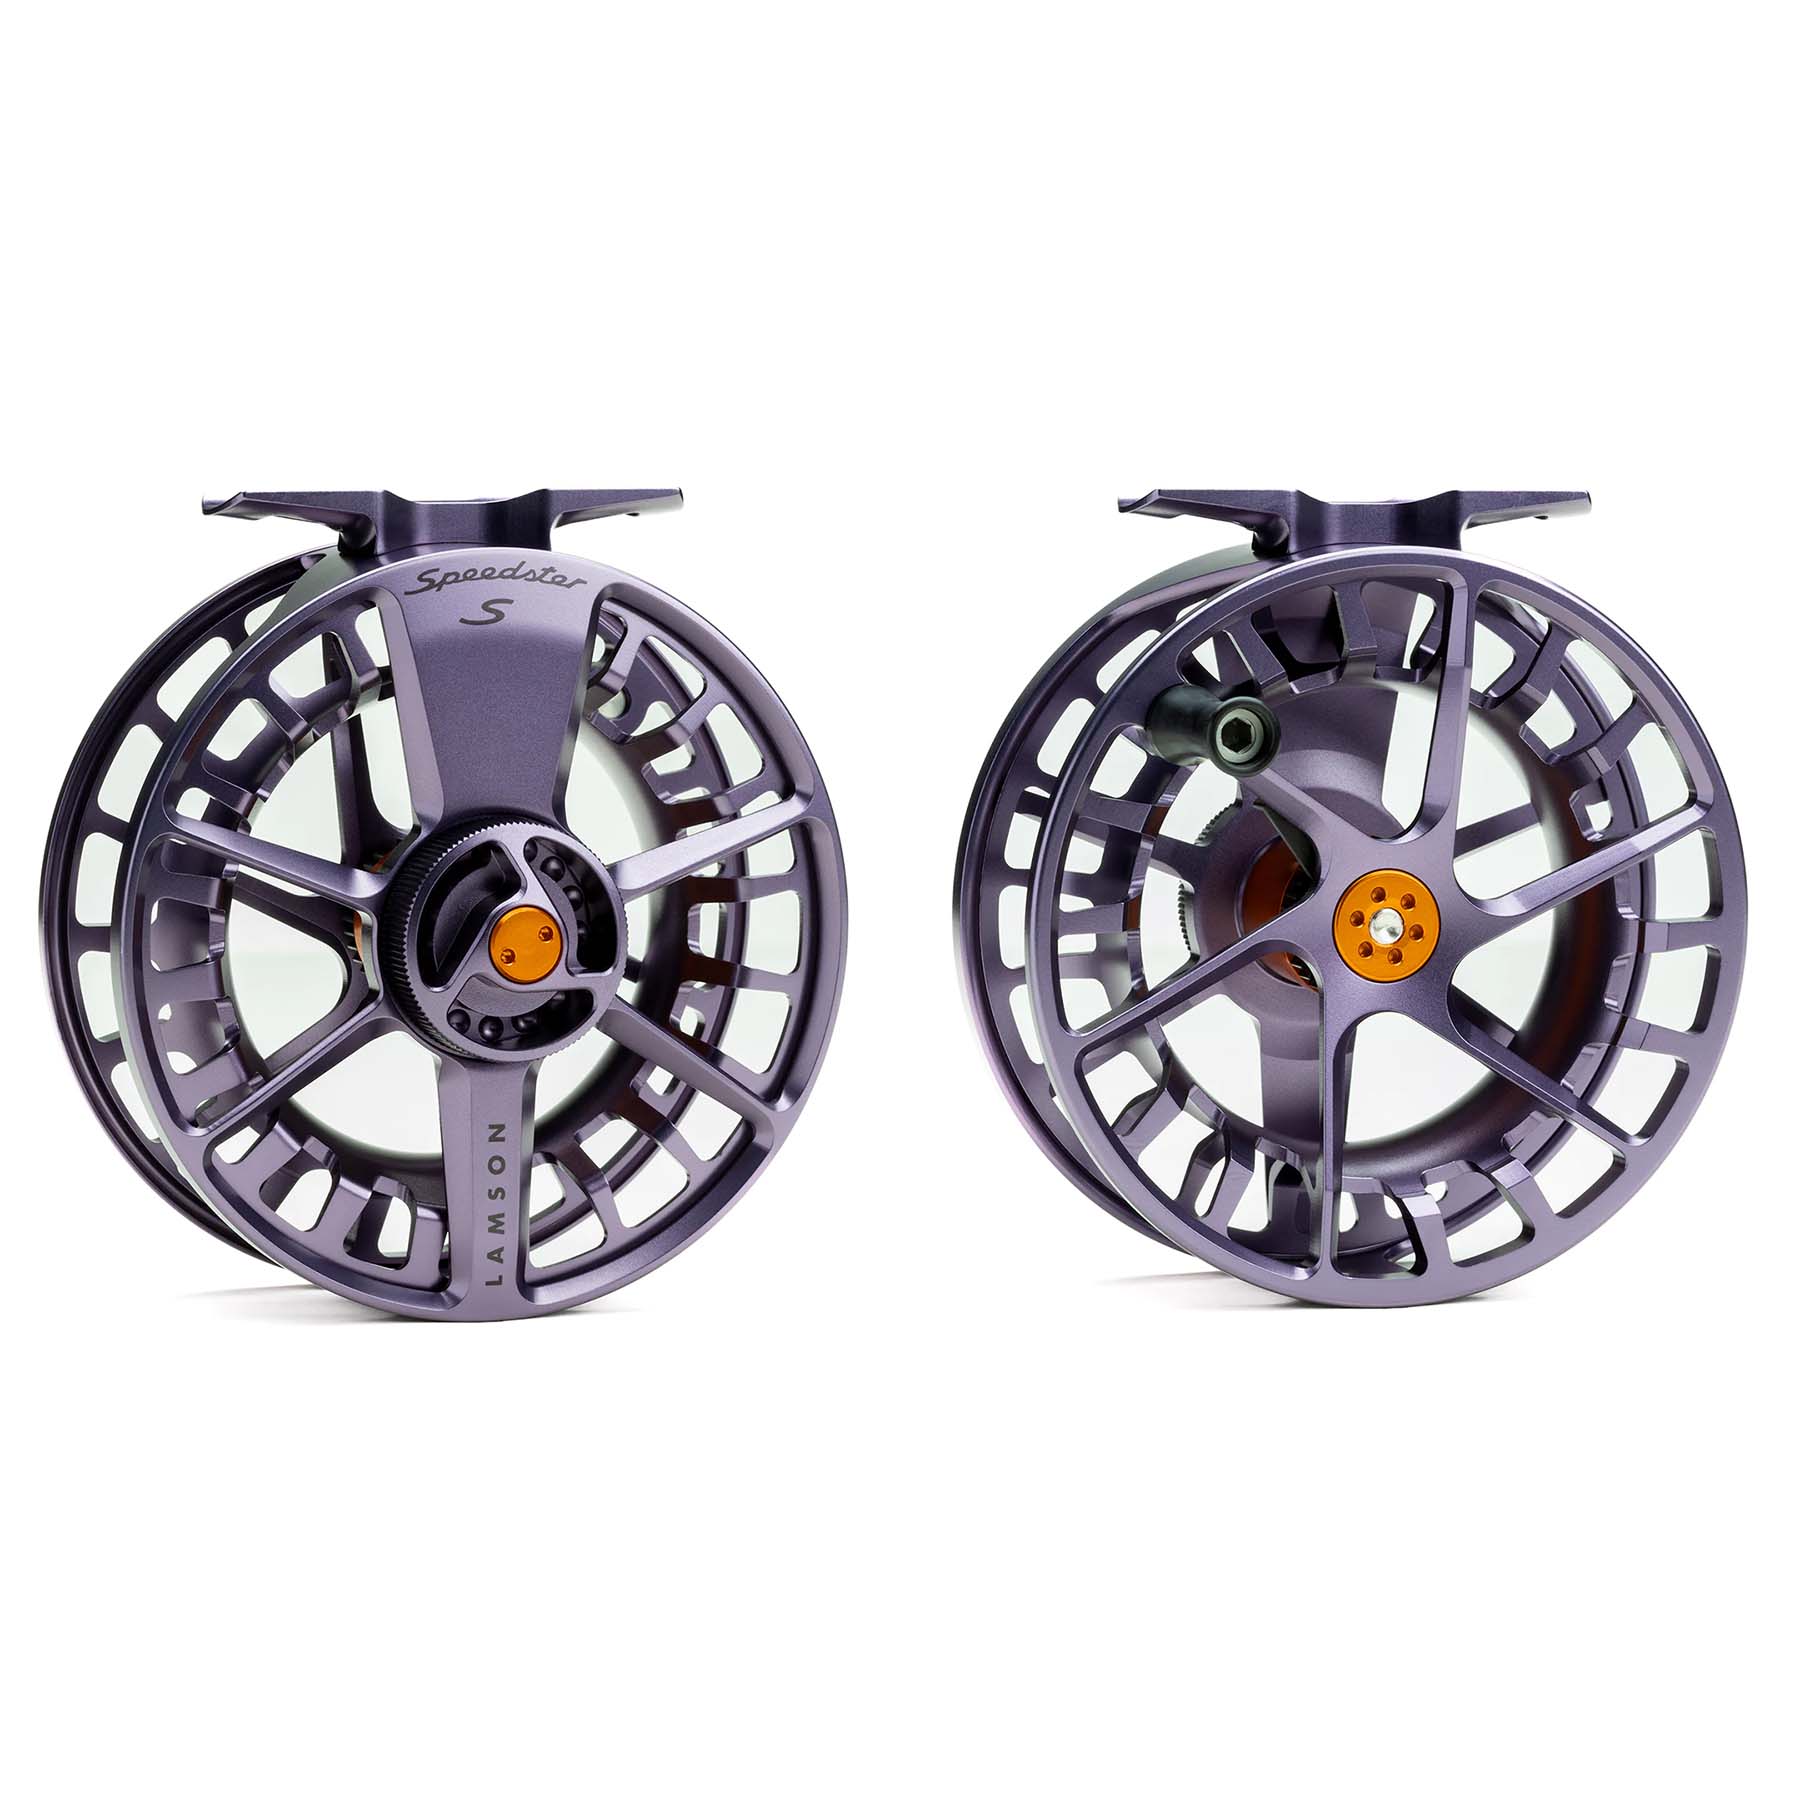 Lamson Liquid -9+ Fly Reel - 3-Pack, Factory Seconds - Save 35%